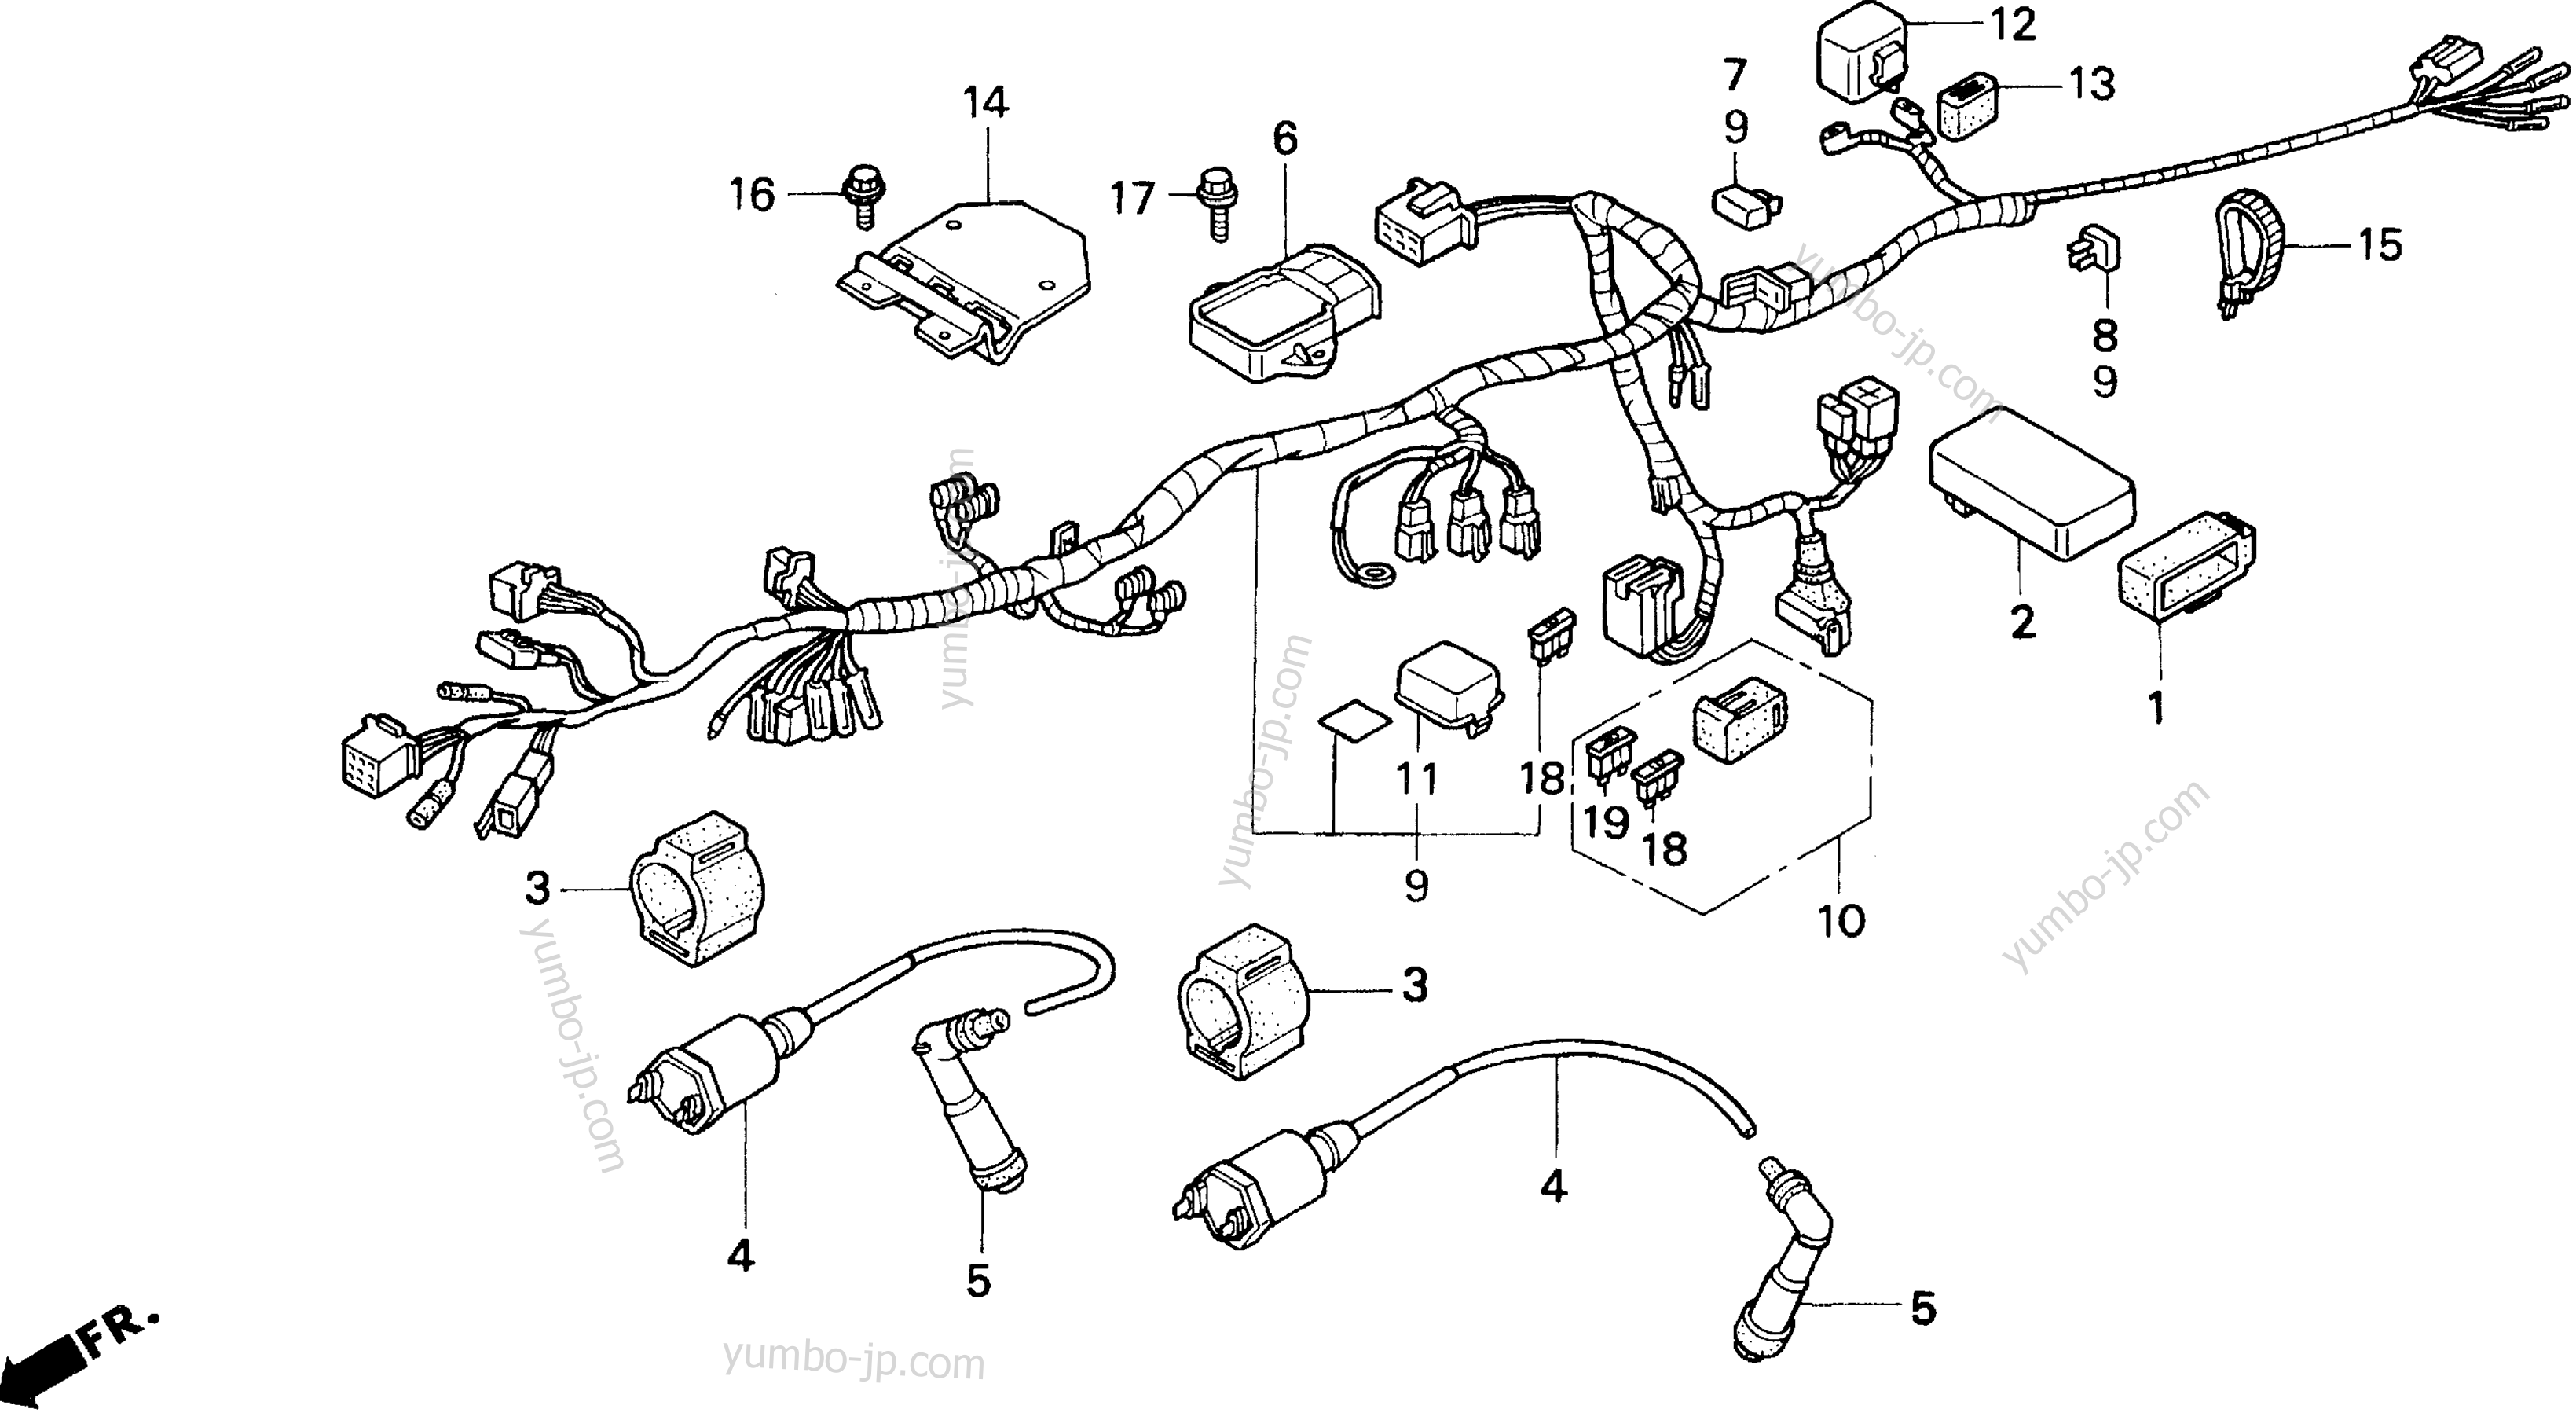 WIRE HARNESS for motorcycles HONDA CB250 A 1995 year